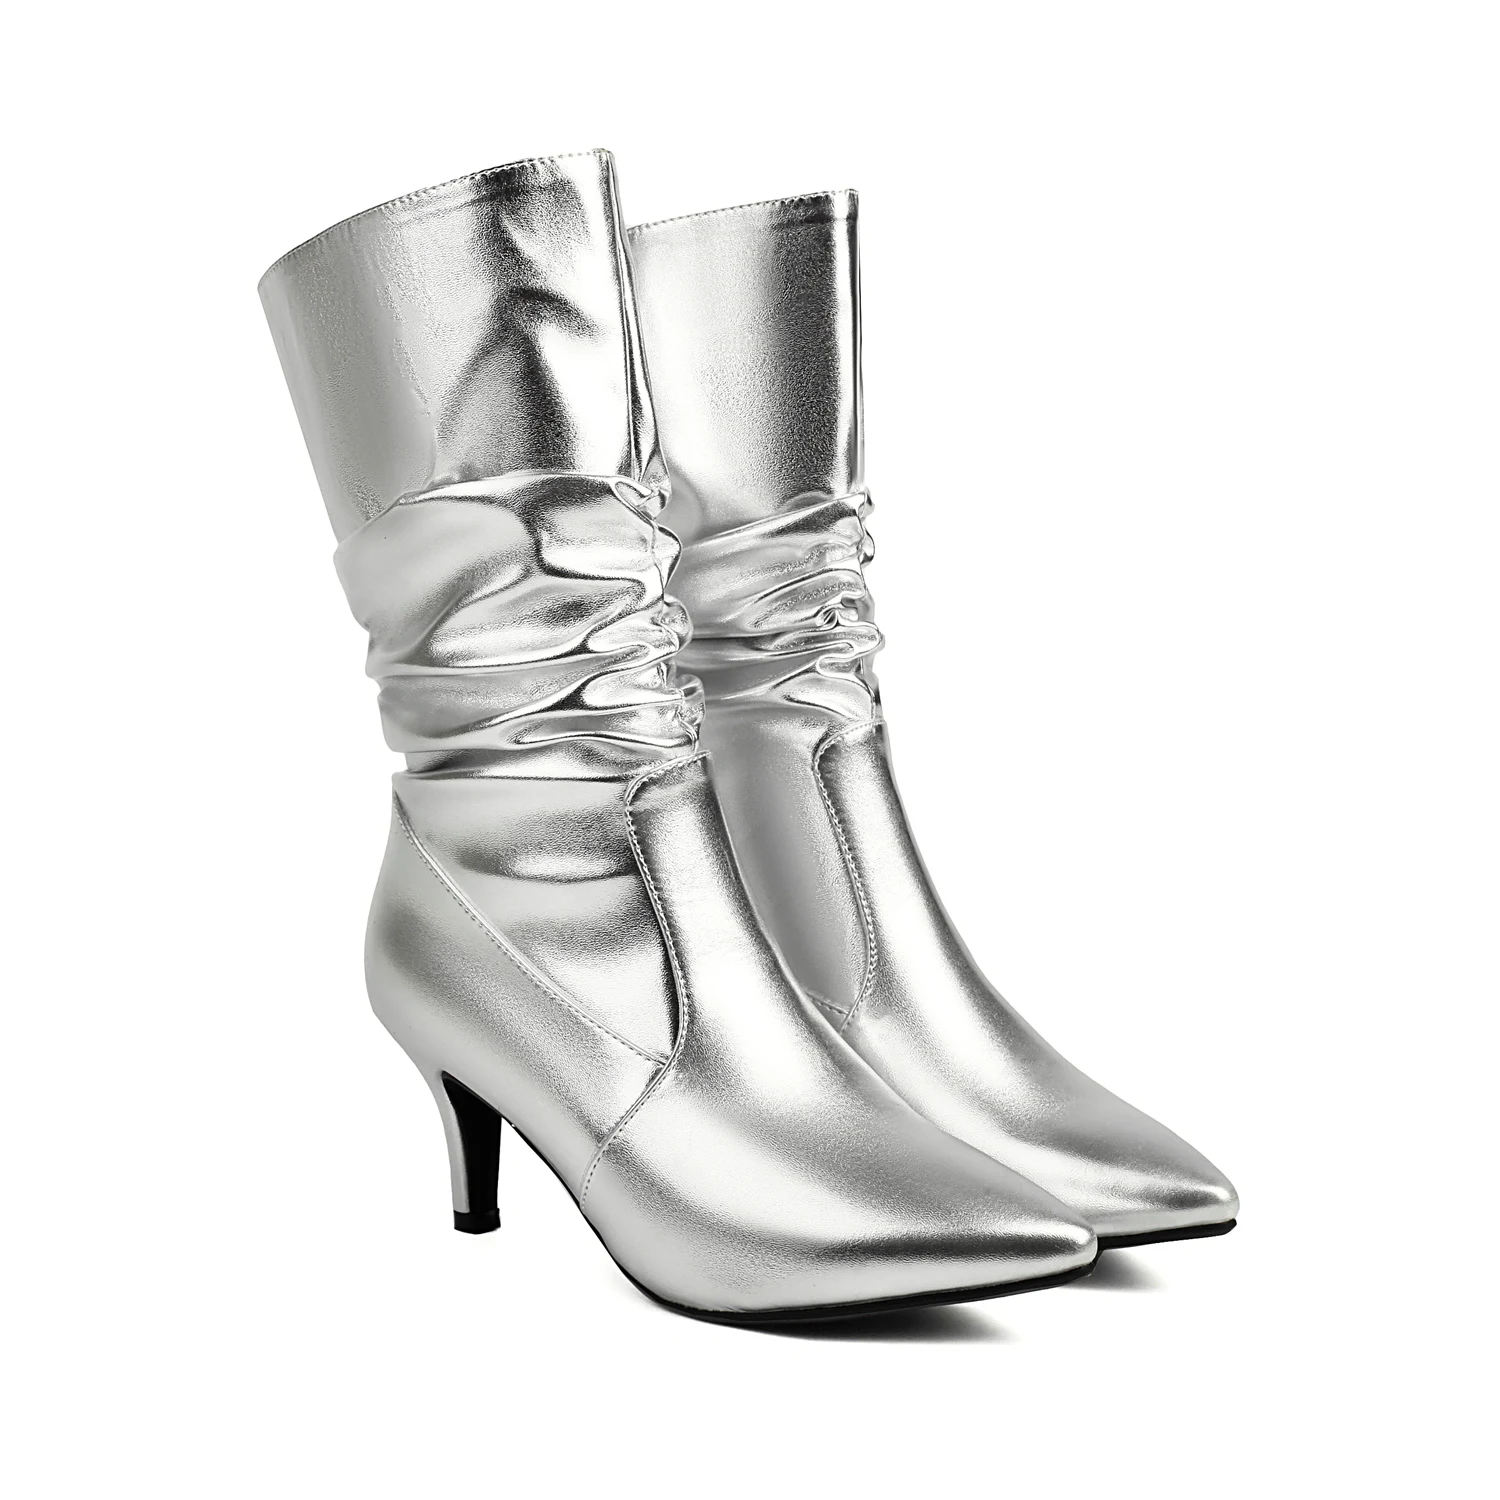 

Metallic Gold Silver Slouch Boots Heels Stiletto Wide Calf Shoes Adjustable Pleated Pointed Toe Soft PU Botas Mujer